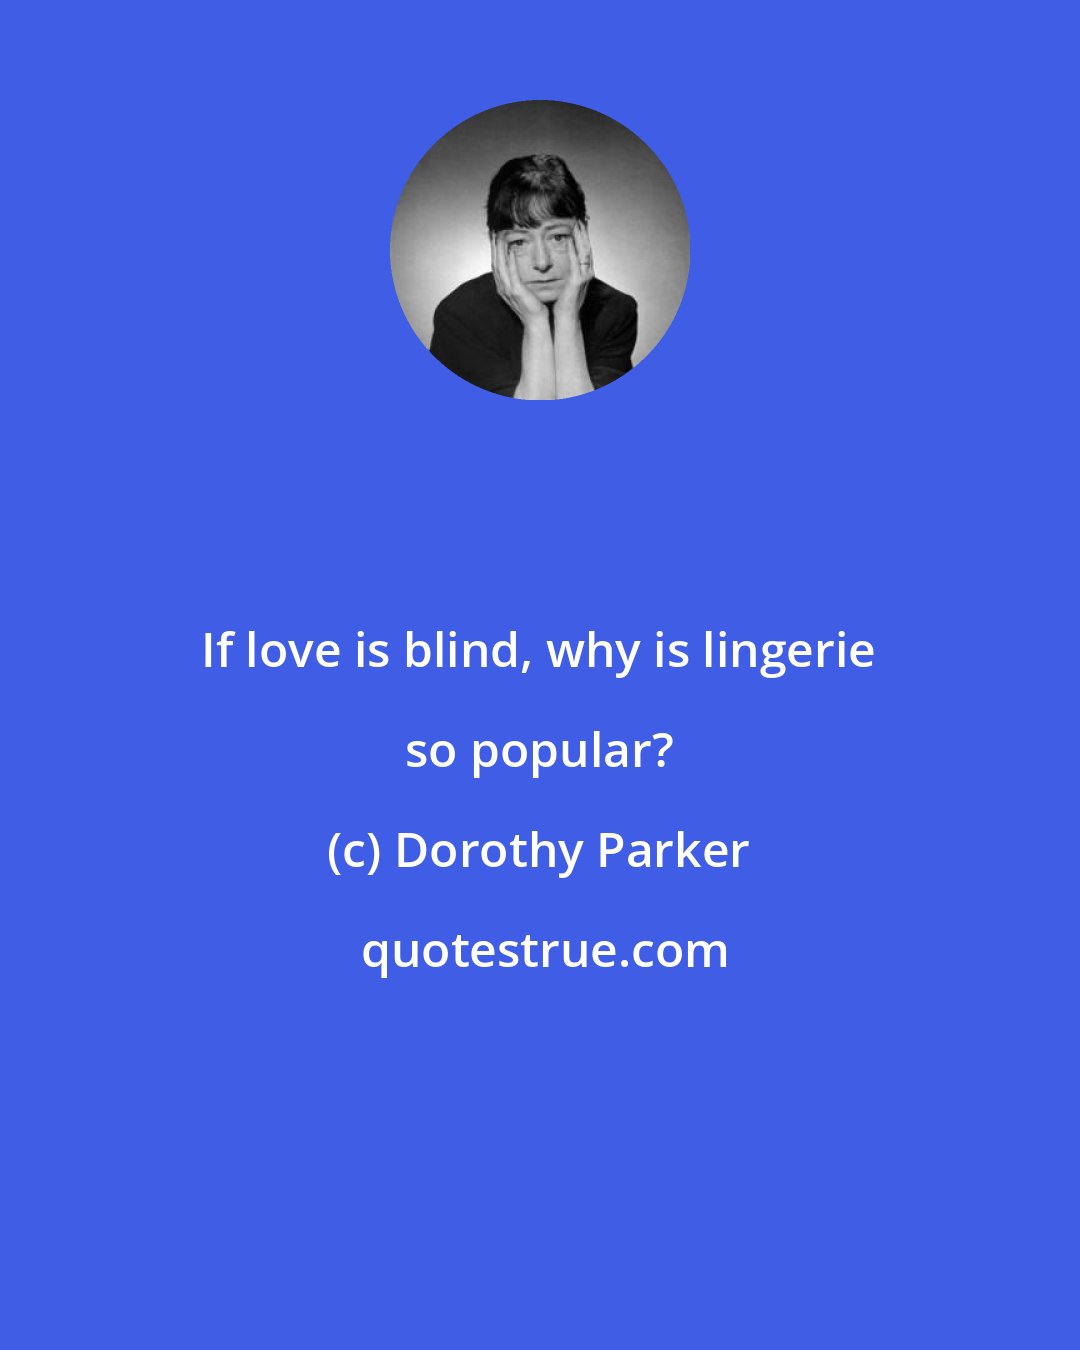 Dorothy Parker: If love is blind, why is lingerie so popular?